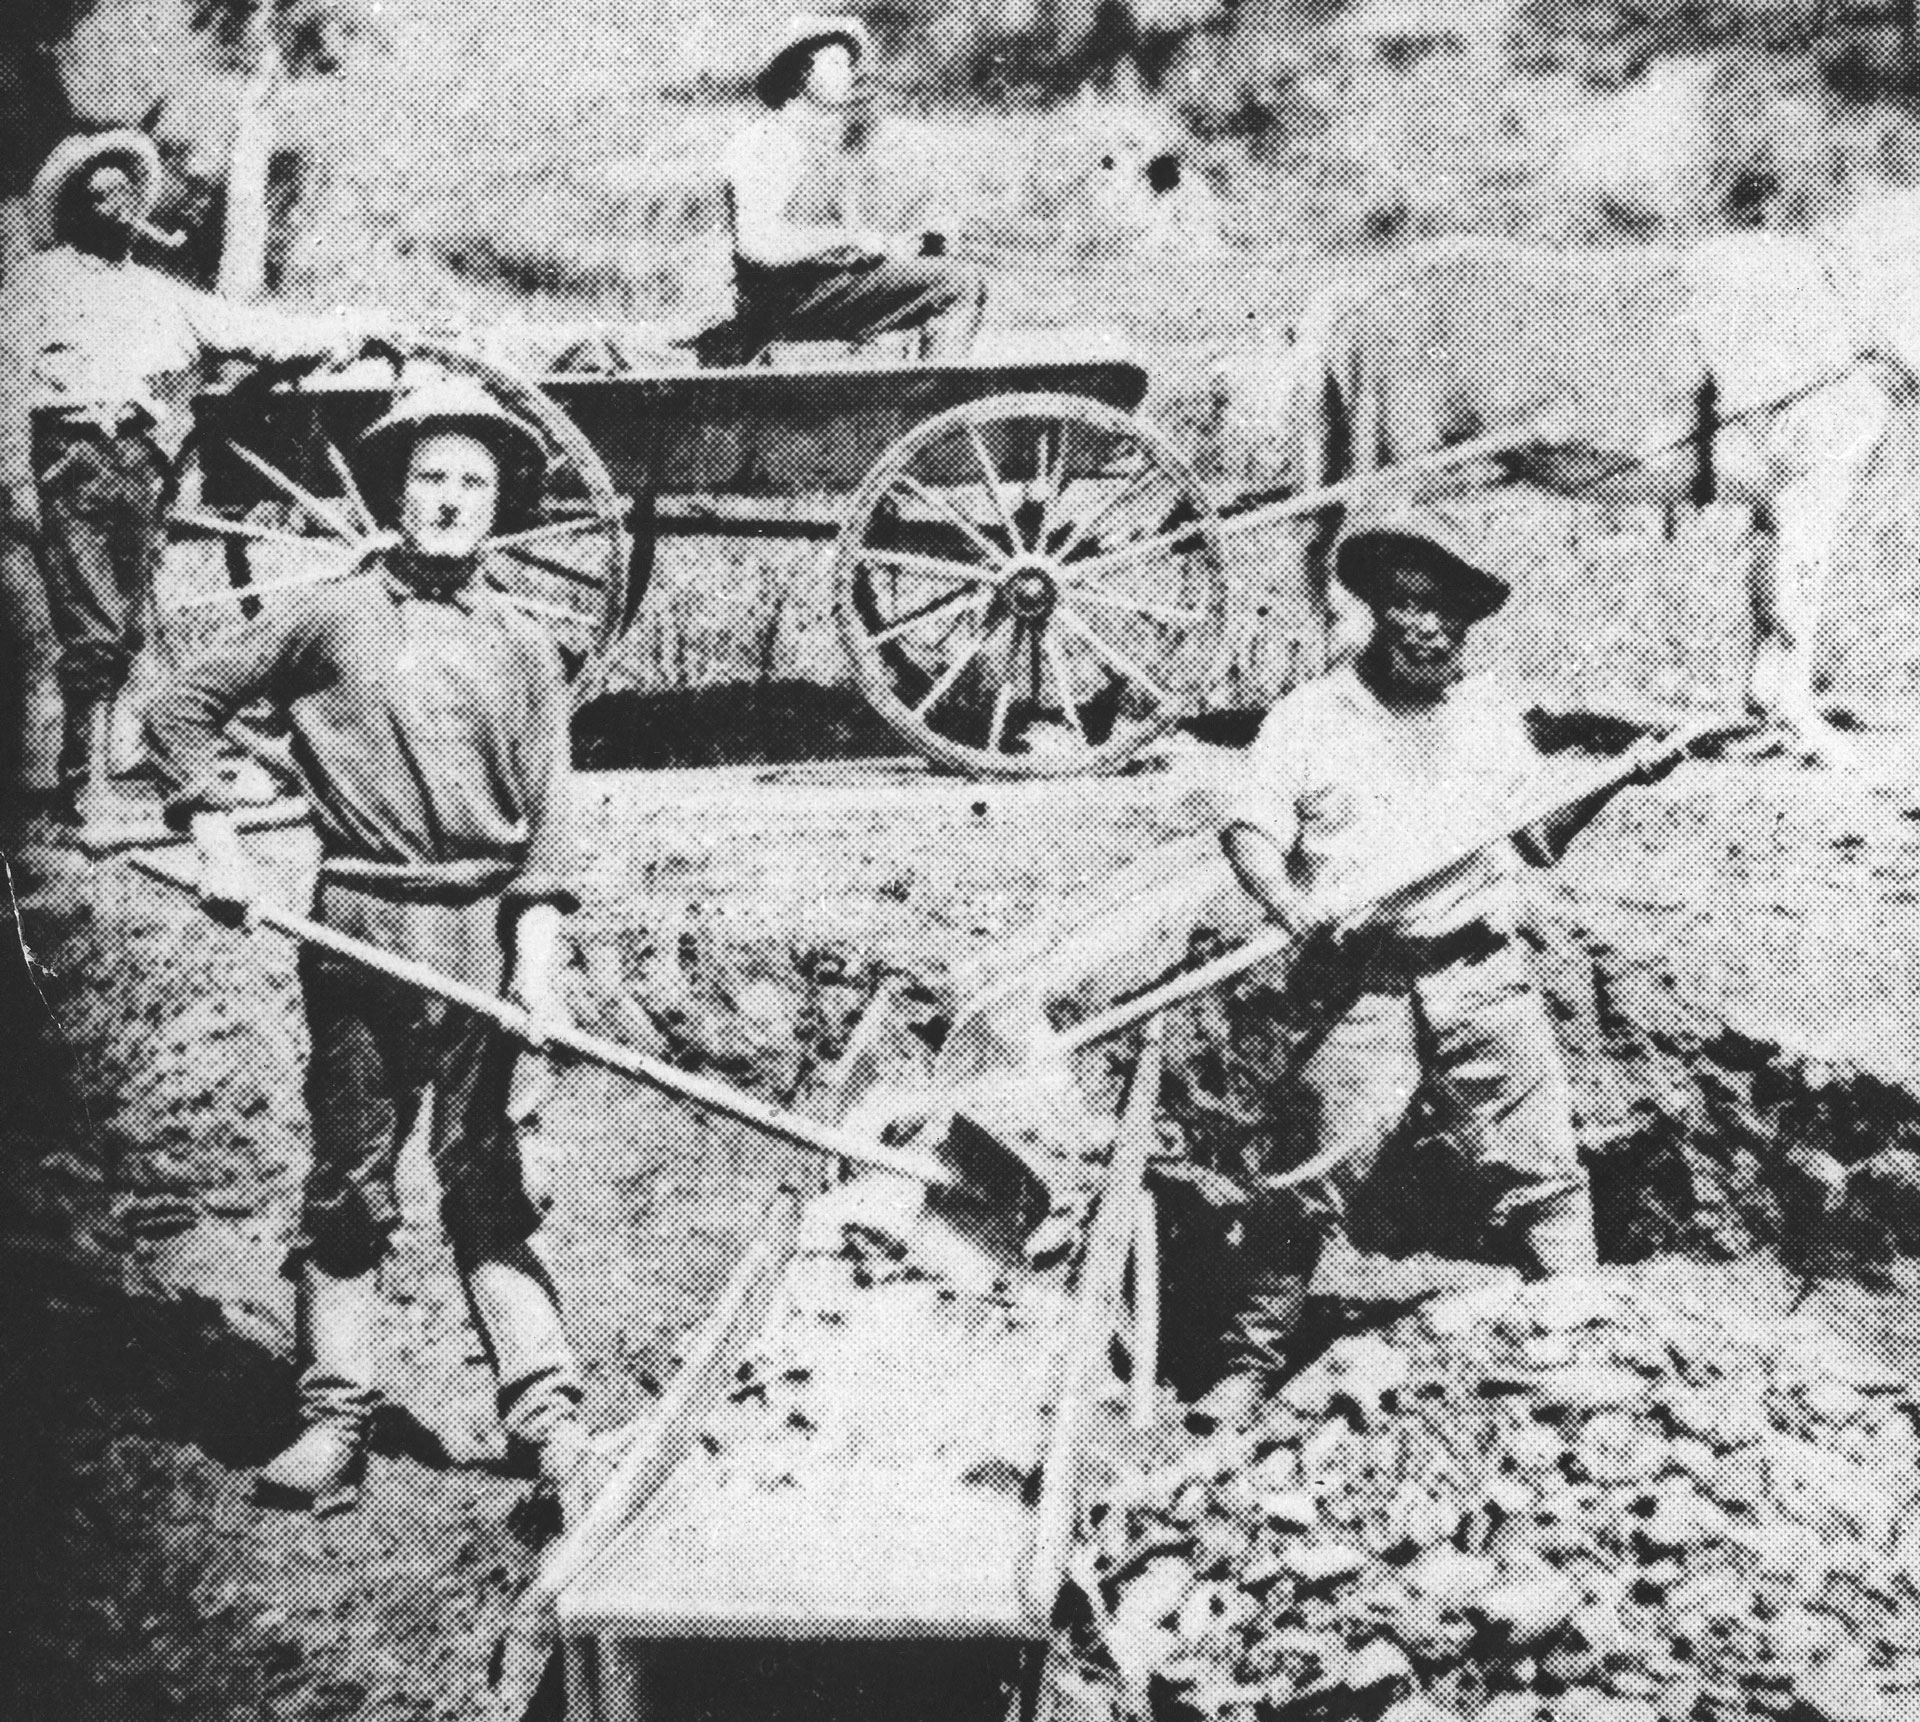 Black and white image of men holding shovels standing next to a pile of rocks with a horse-drawn wagon in the background